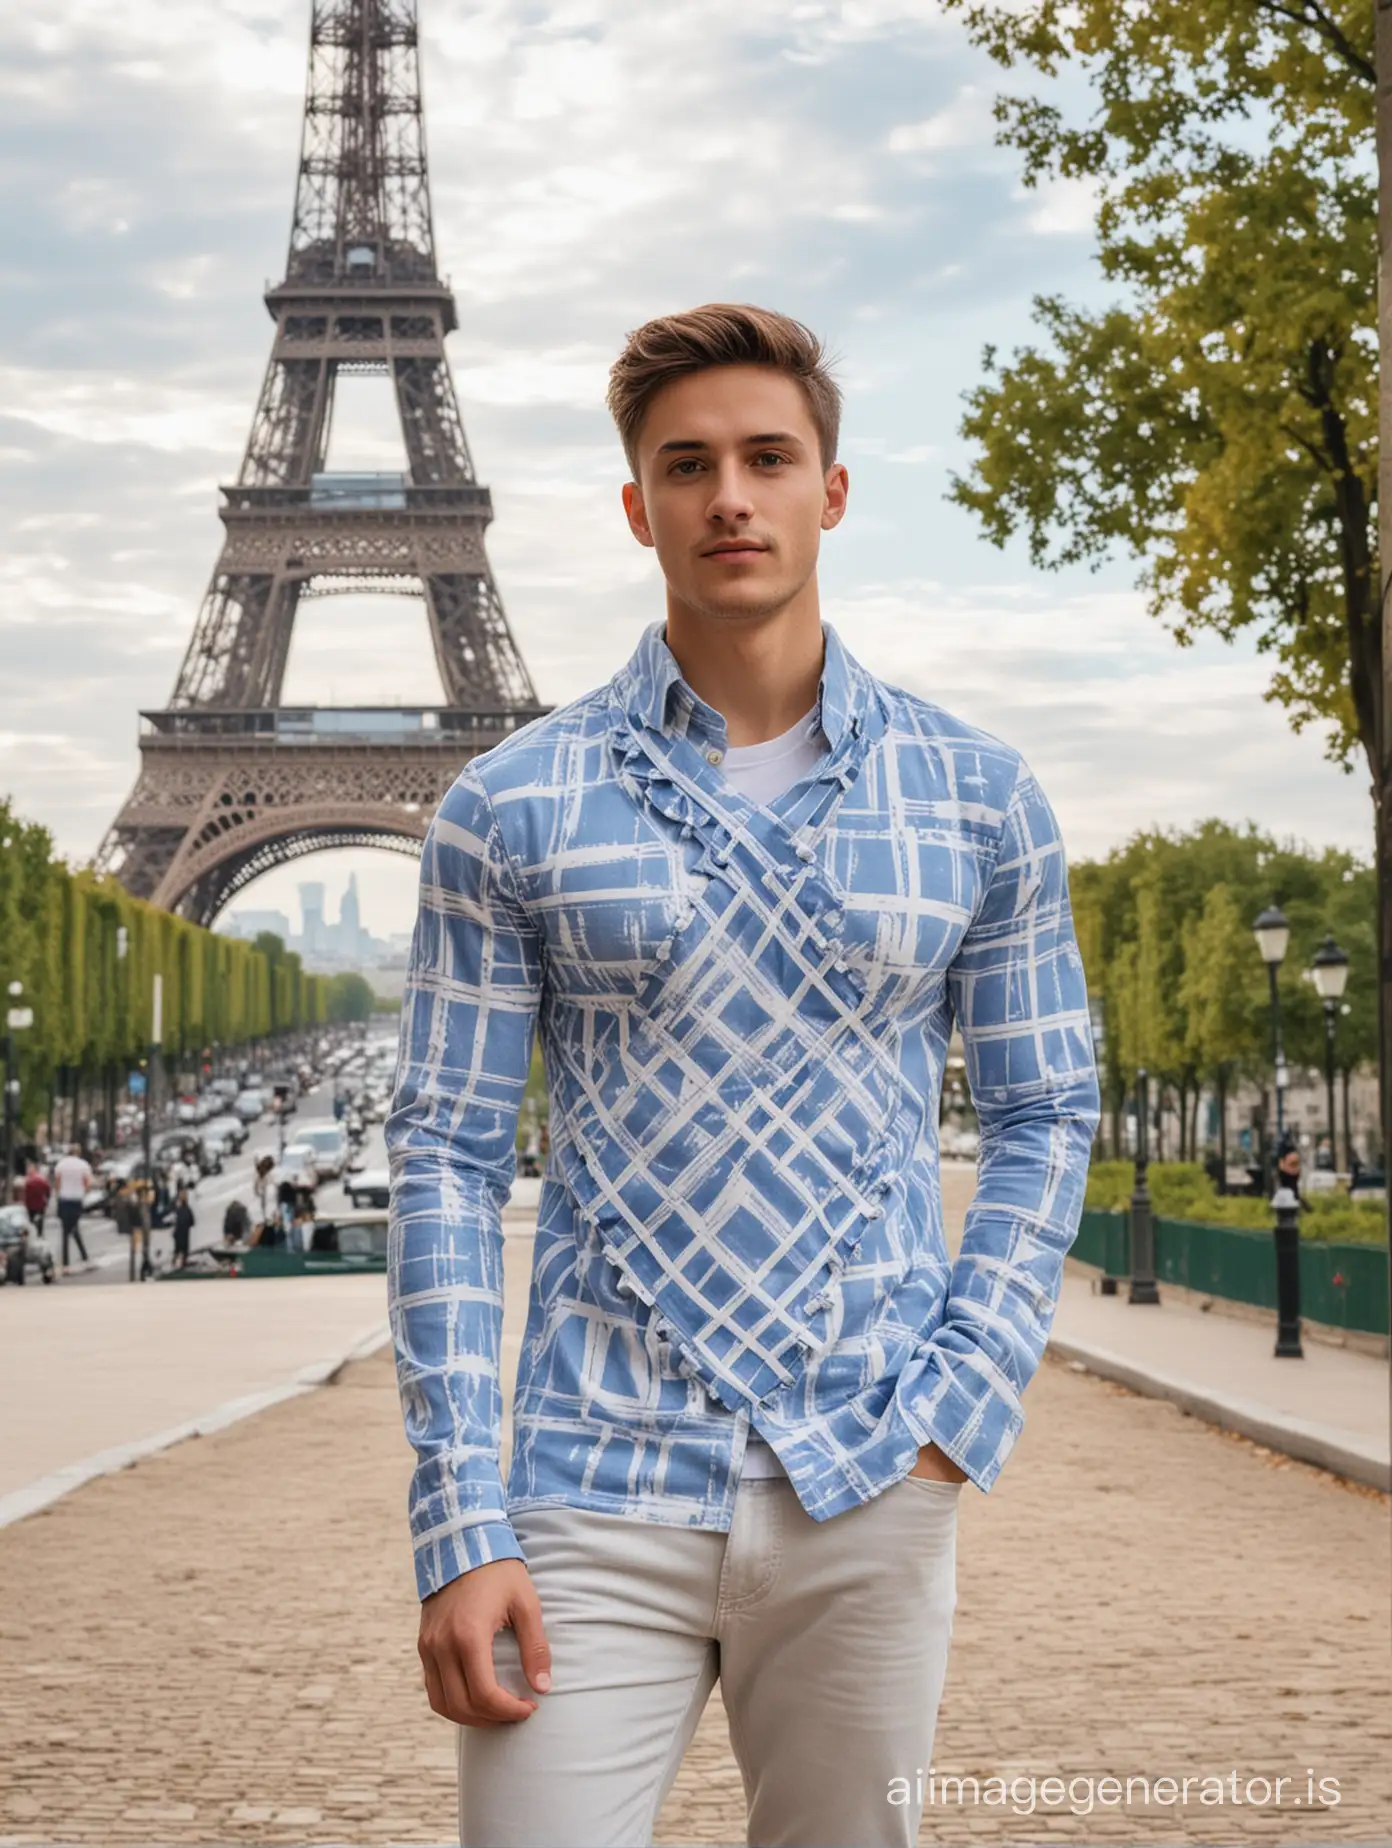 A young man wearing long sleeve criss cross blue and white color, standing with background of beautiful eifel tower